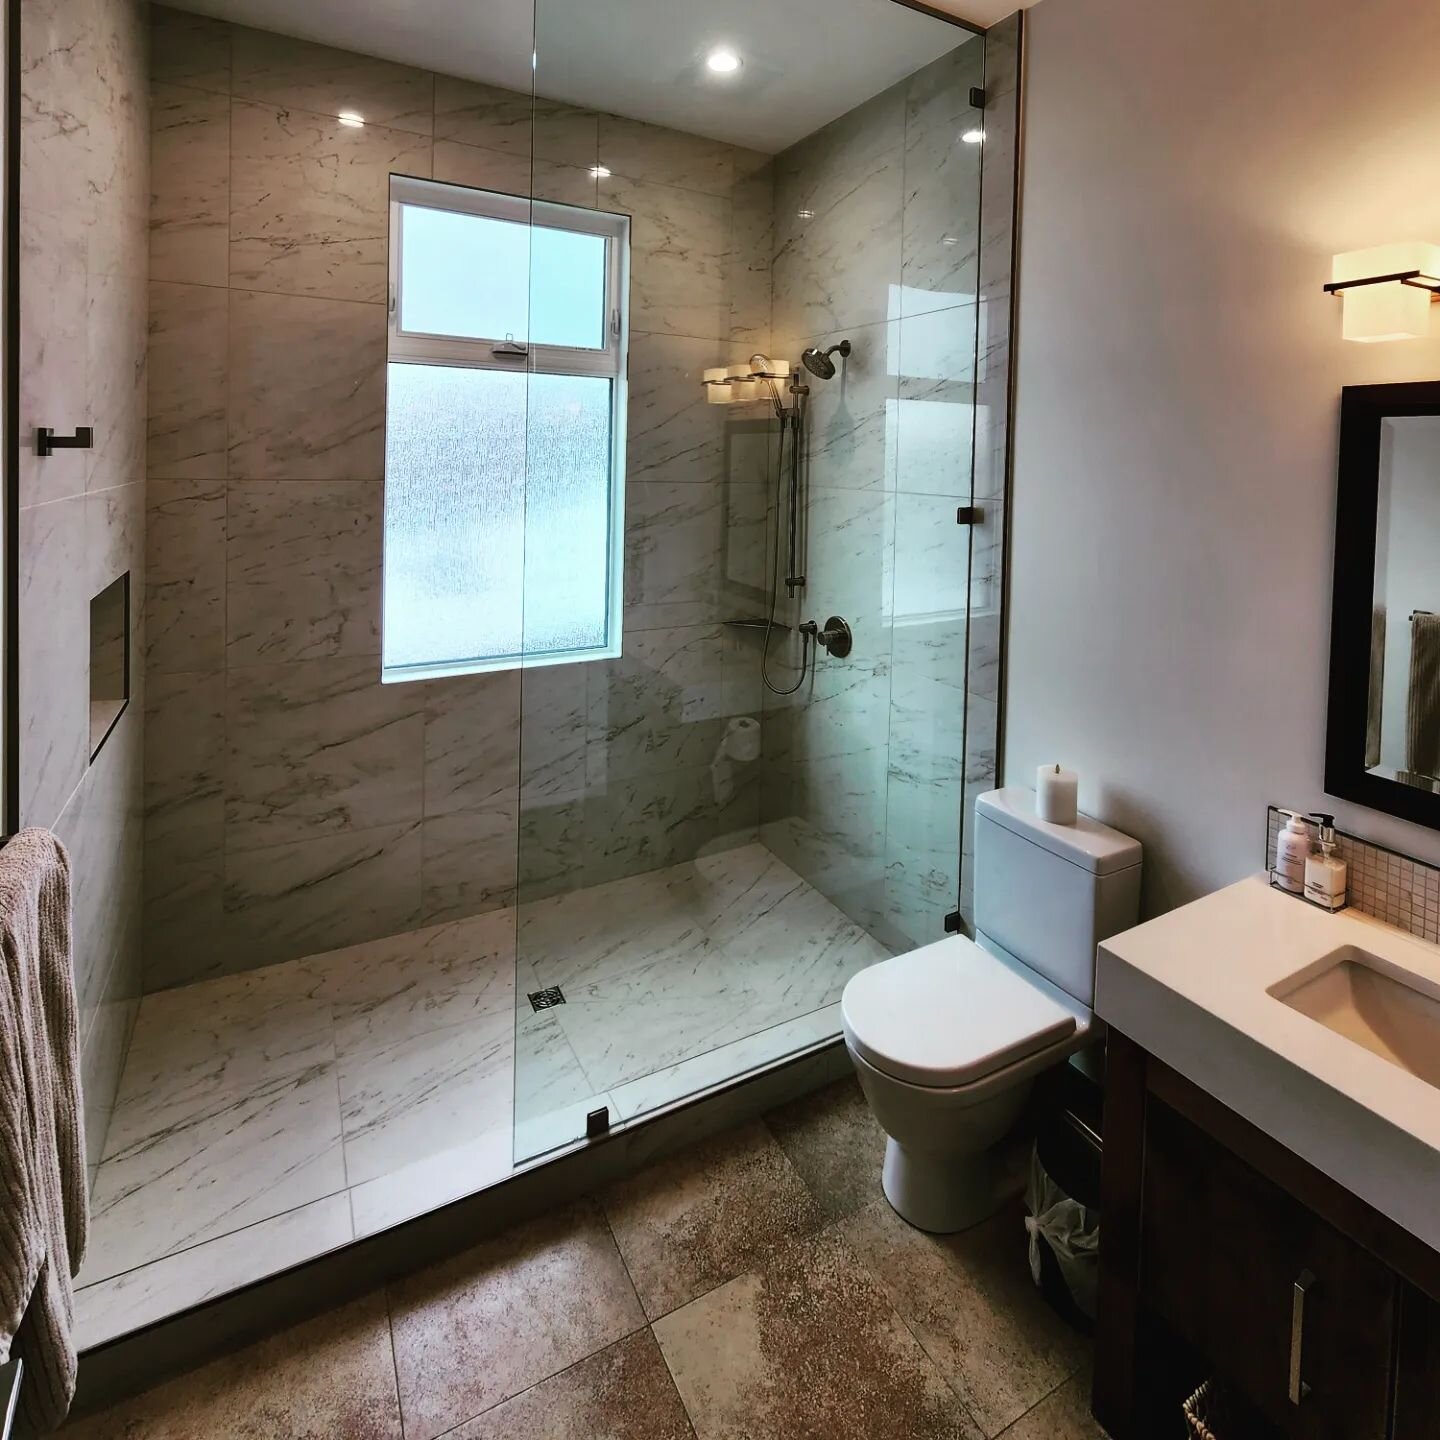 Hey, look! A bathroom reno!

We converted this massive tub only bathroom into an even larger walk-in shower, updated the vanity with a waterfall quartz top, undermount basin, and Riobel lav faucet. 

The existing wood frame window was changed out for